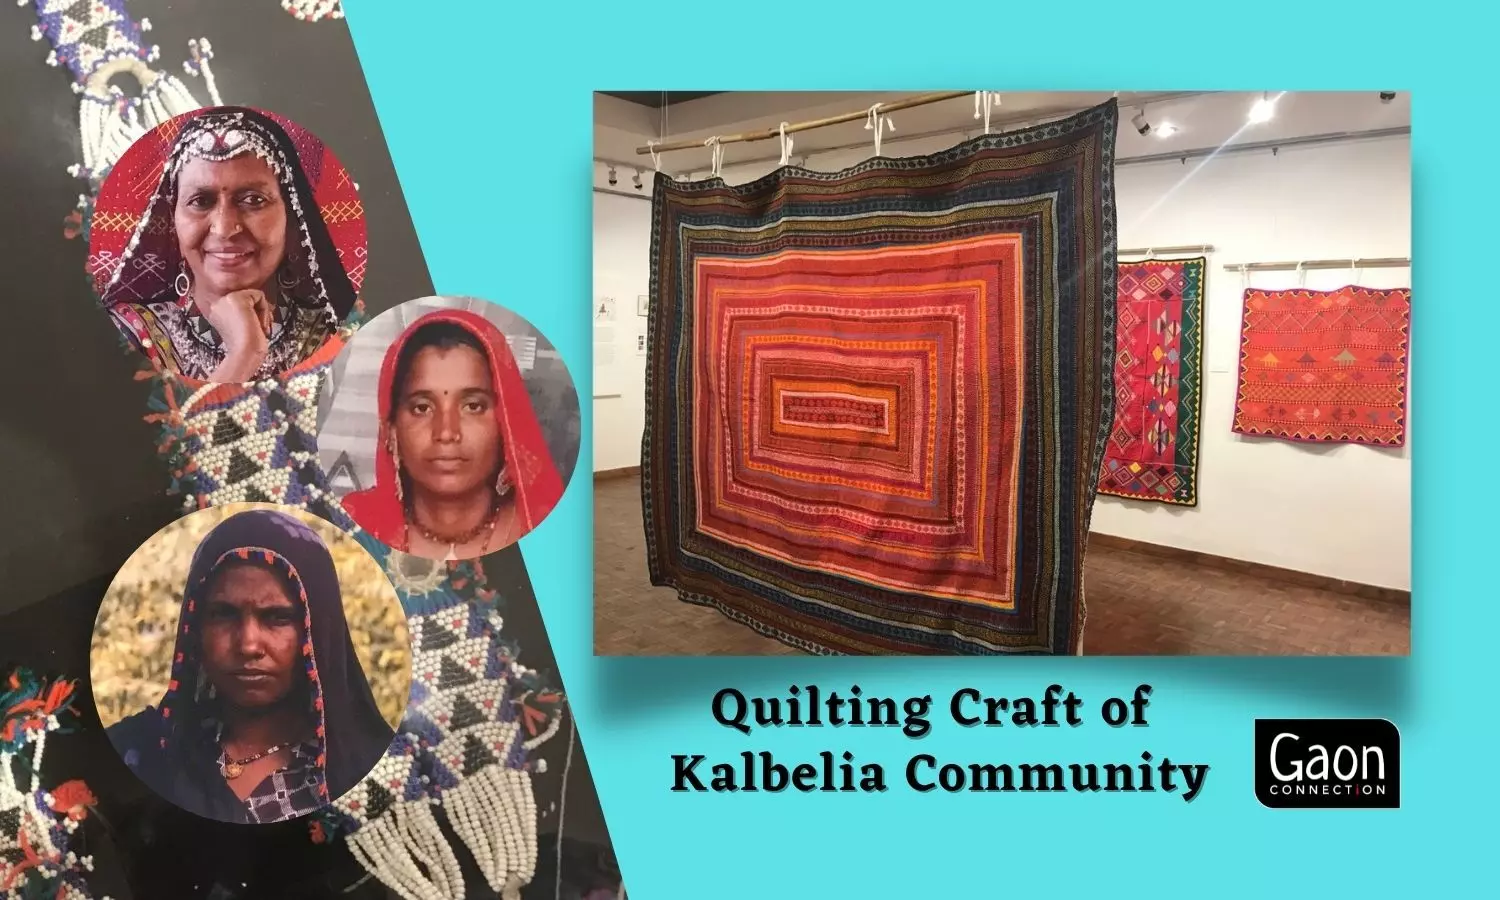 Reviving the quilting craft of the Kalbelia community of snake charmers